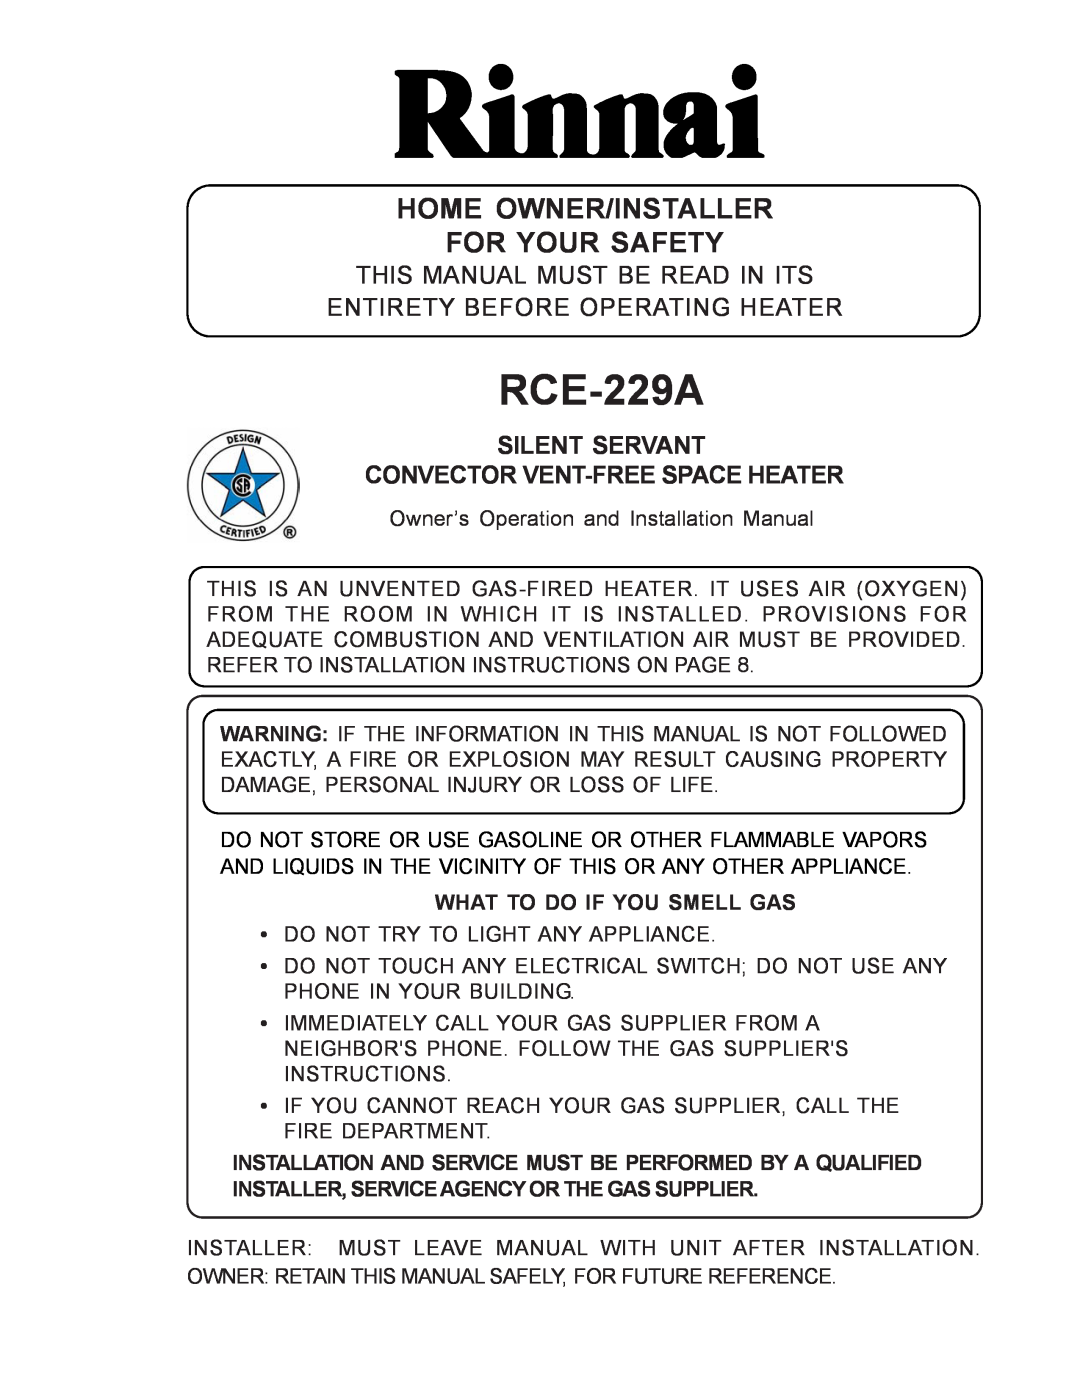 Rinnai RCE-229A installation instructions Silent Servant Convector Vent-Freespace Heater, What To Do If You Smell Gas 